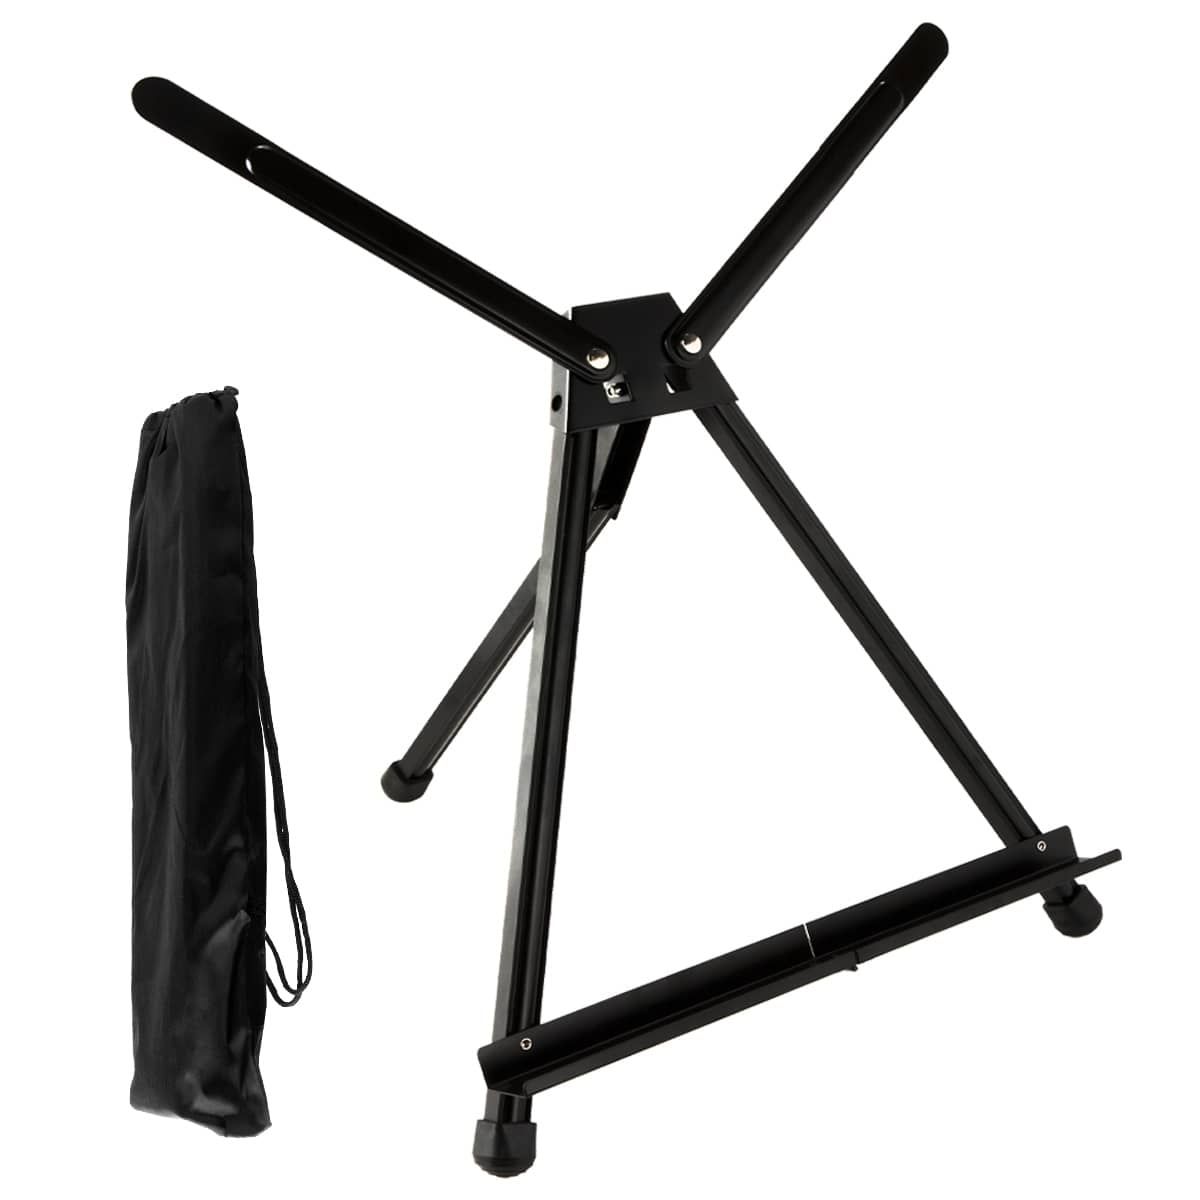 Falling in Art Aluminum Flip Chart Display Easel Stand with